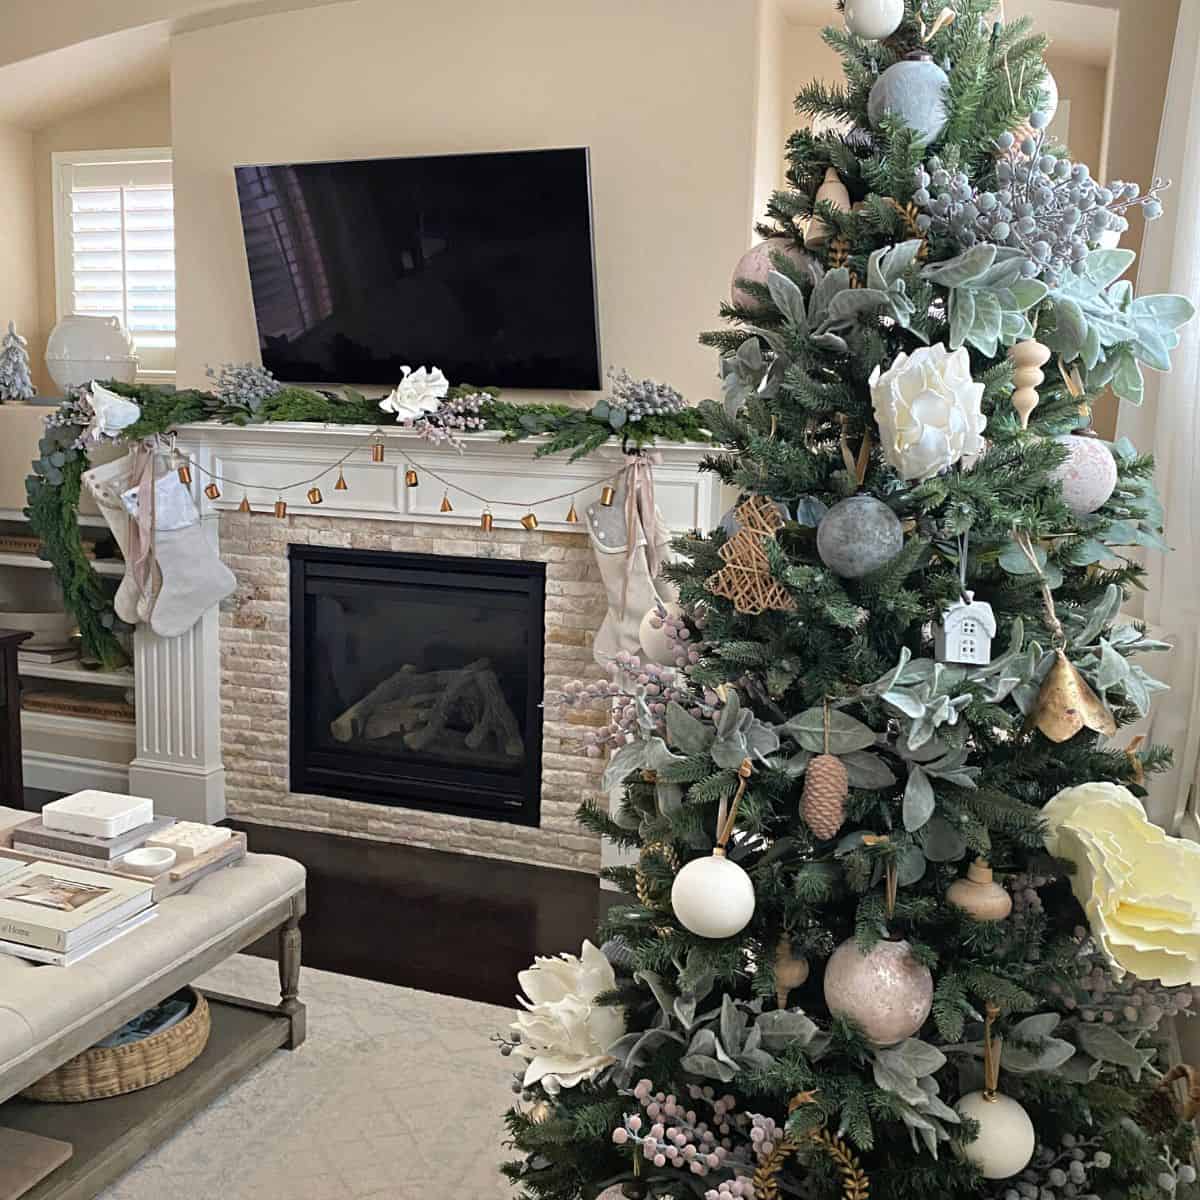 Decorated Christmas tree in living room with fireplace